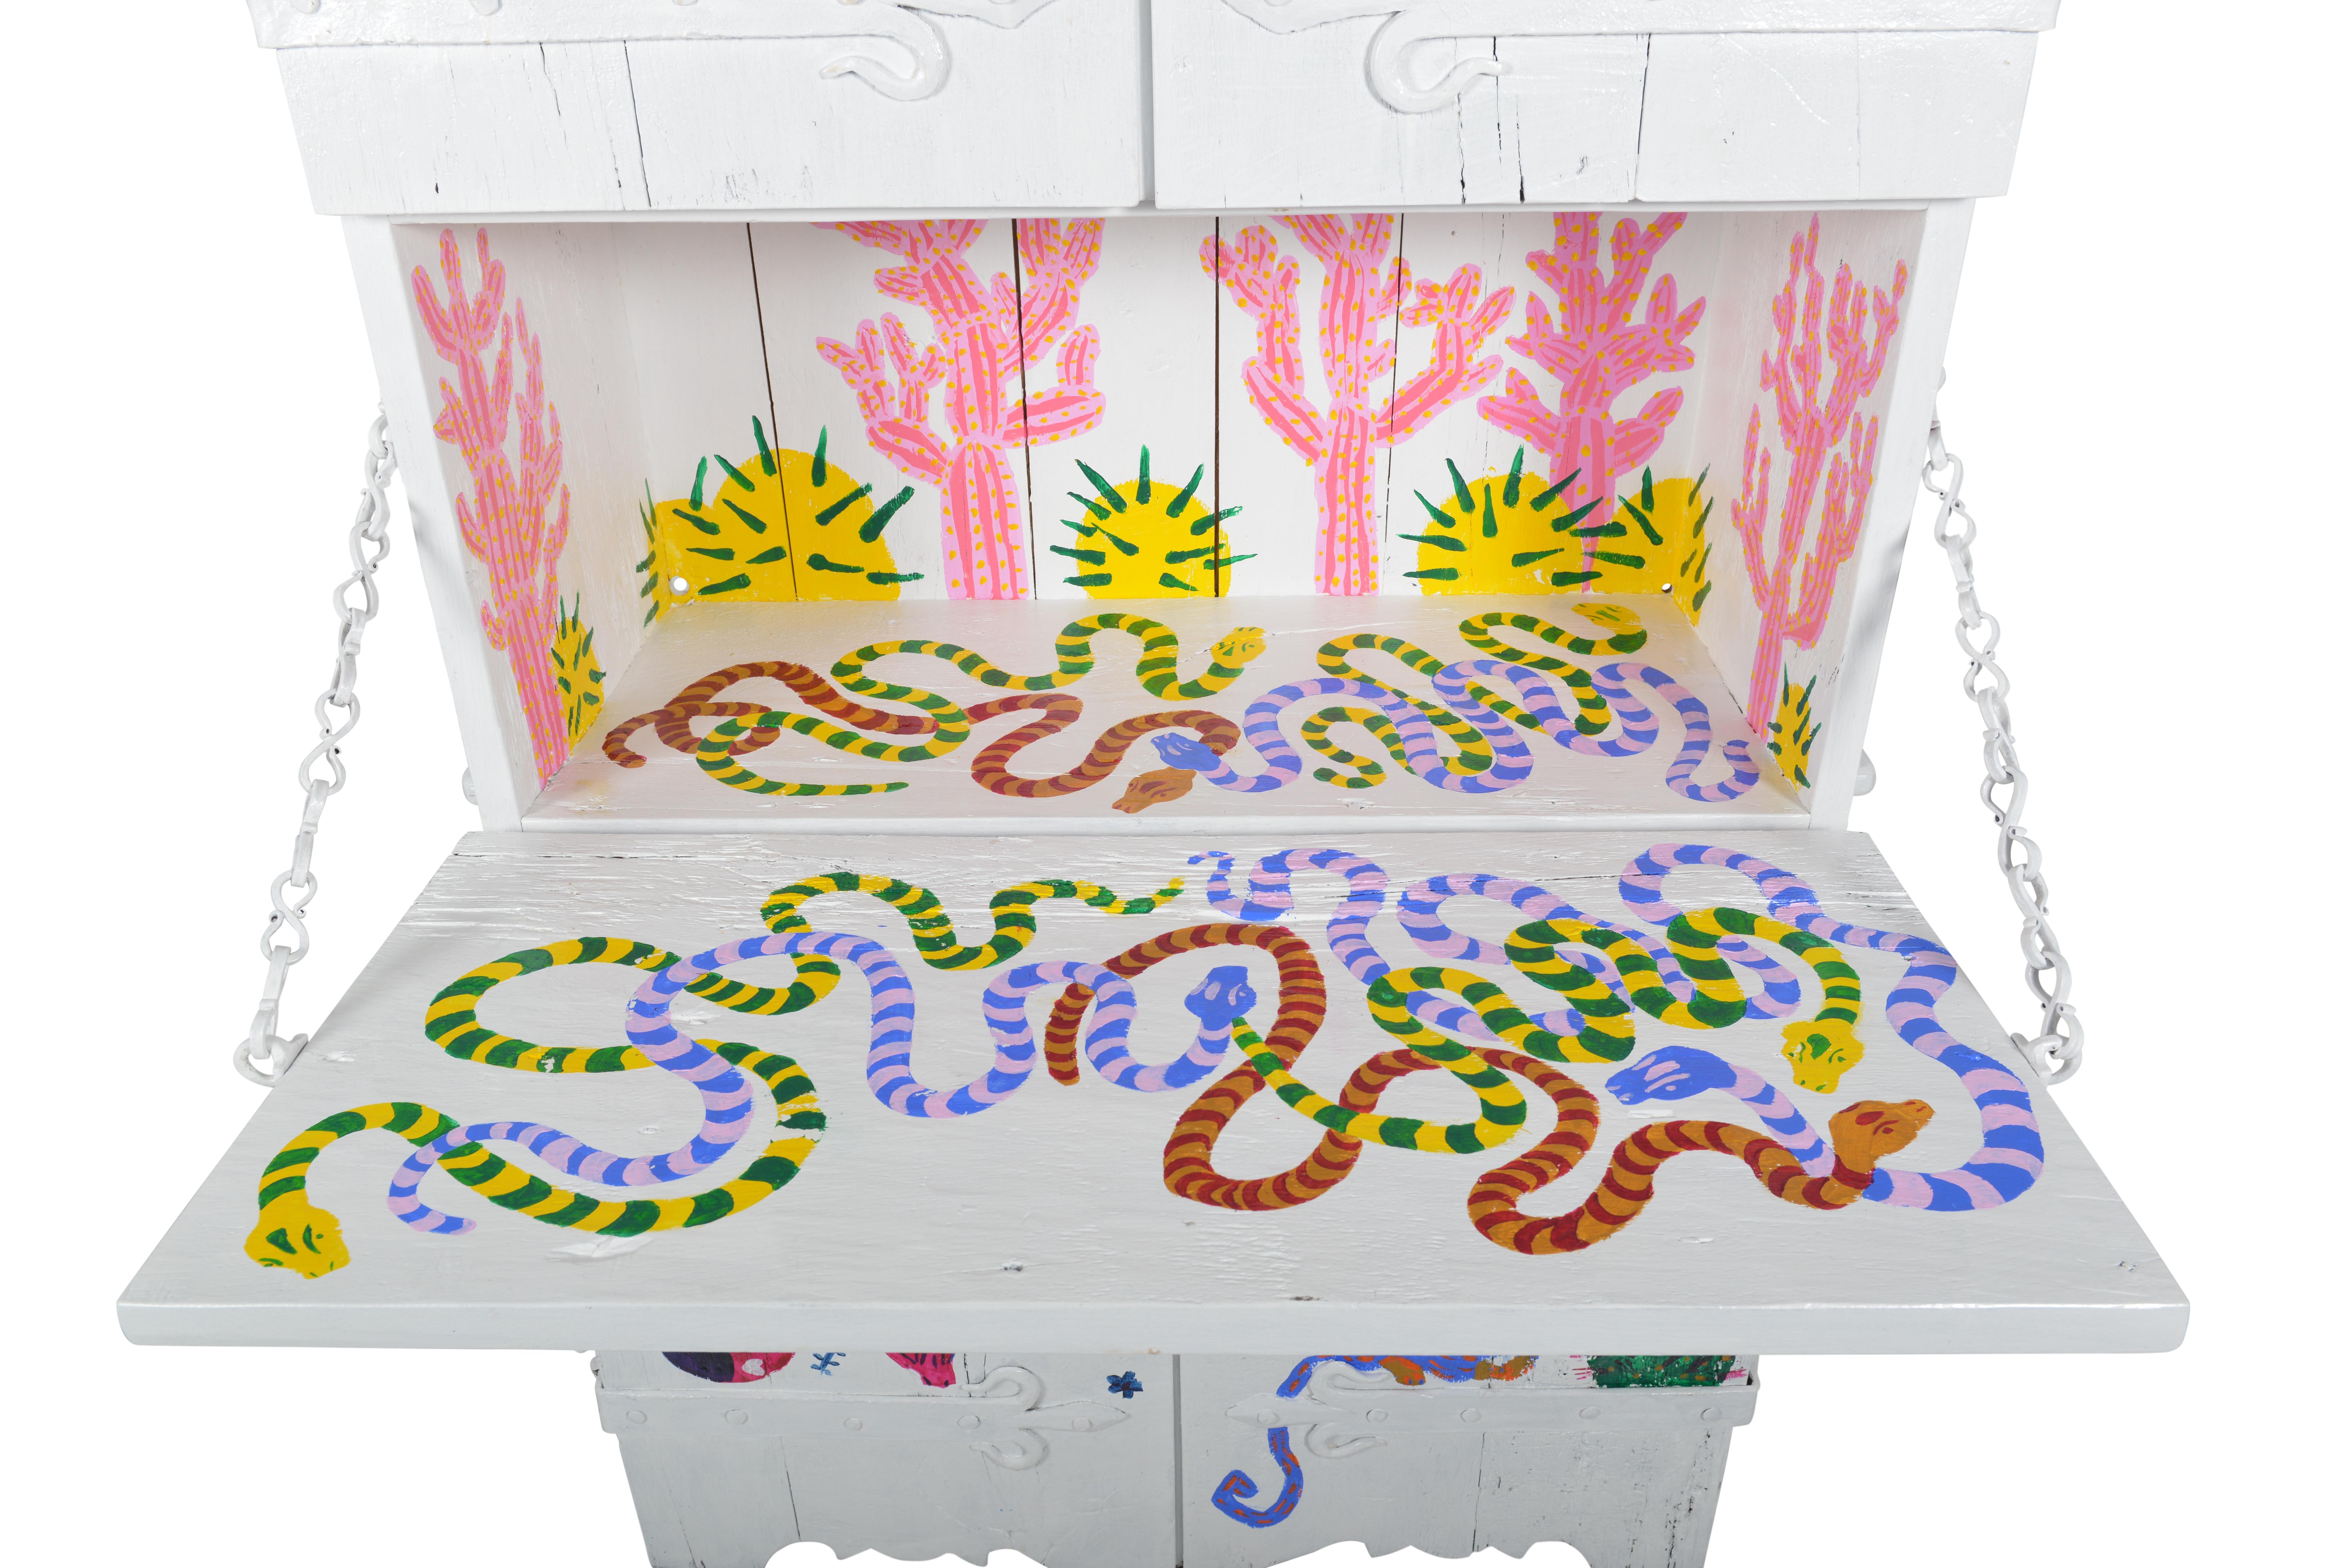 We commissioned the lovely young artist Esther Cornelis to paint a very colourful and phantasmagorical flora and fauna on an old Arts and Crafts scriptor. The escritoire is in the local Flemish gothic revival style and made of oak and forged iron